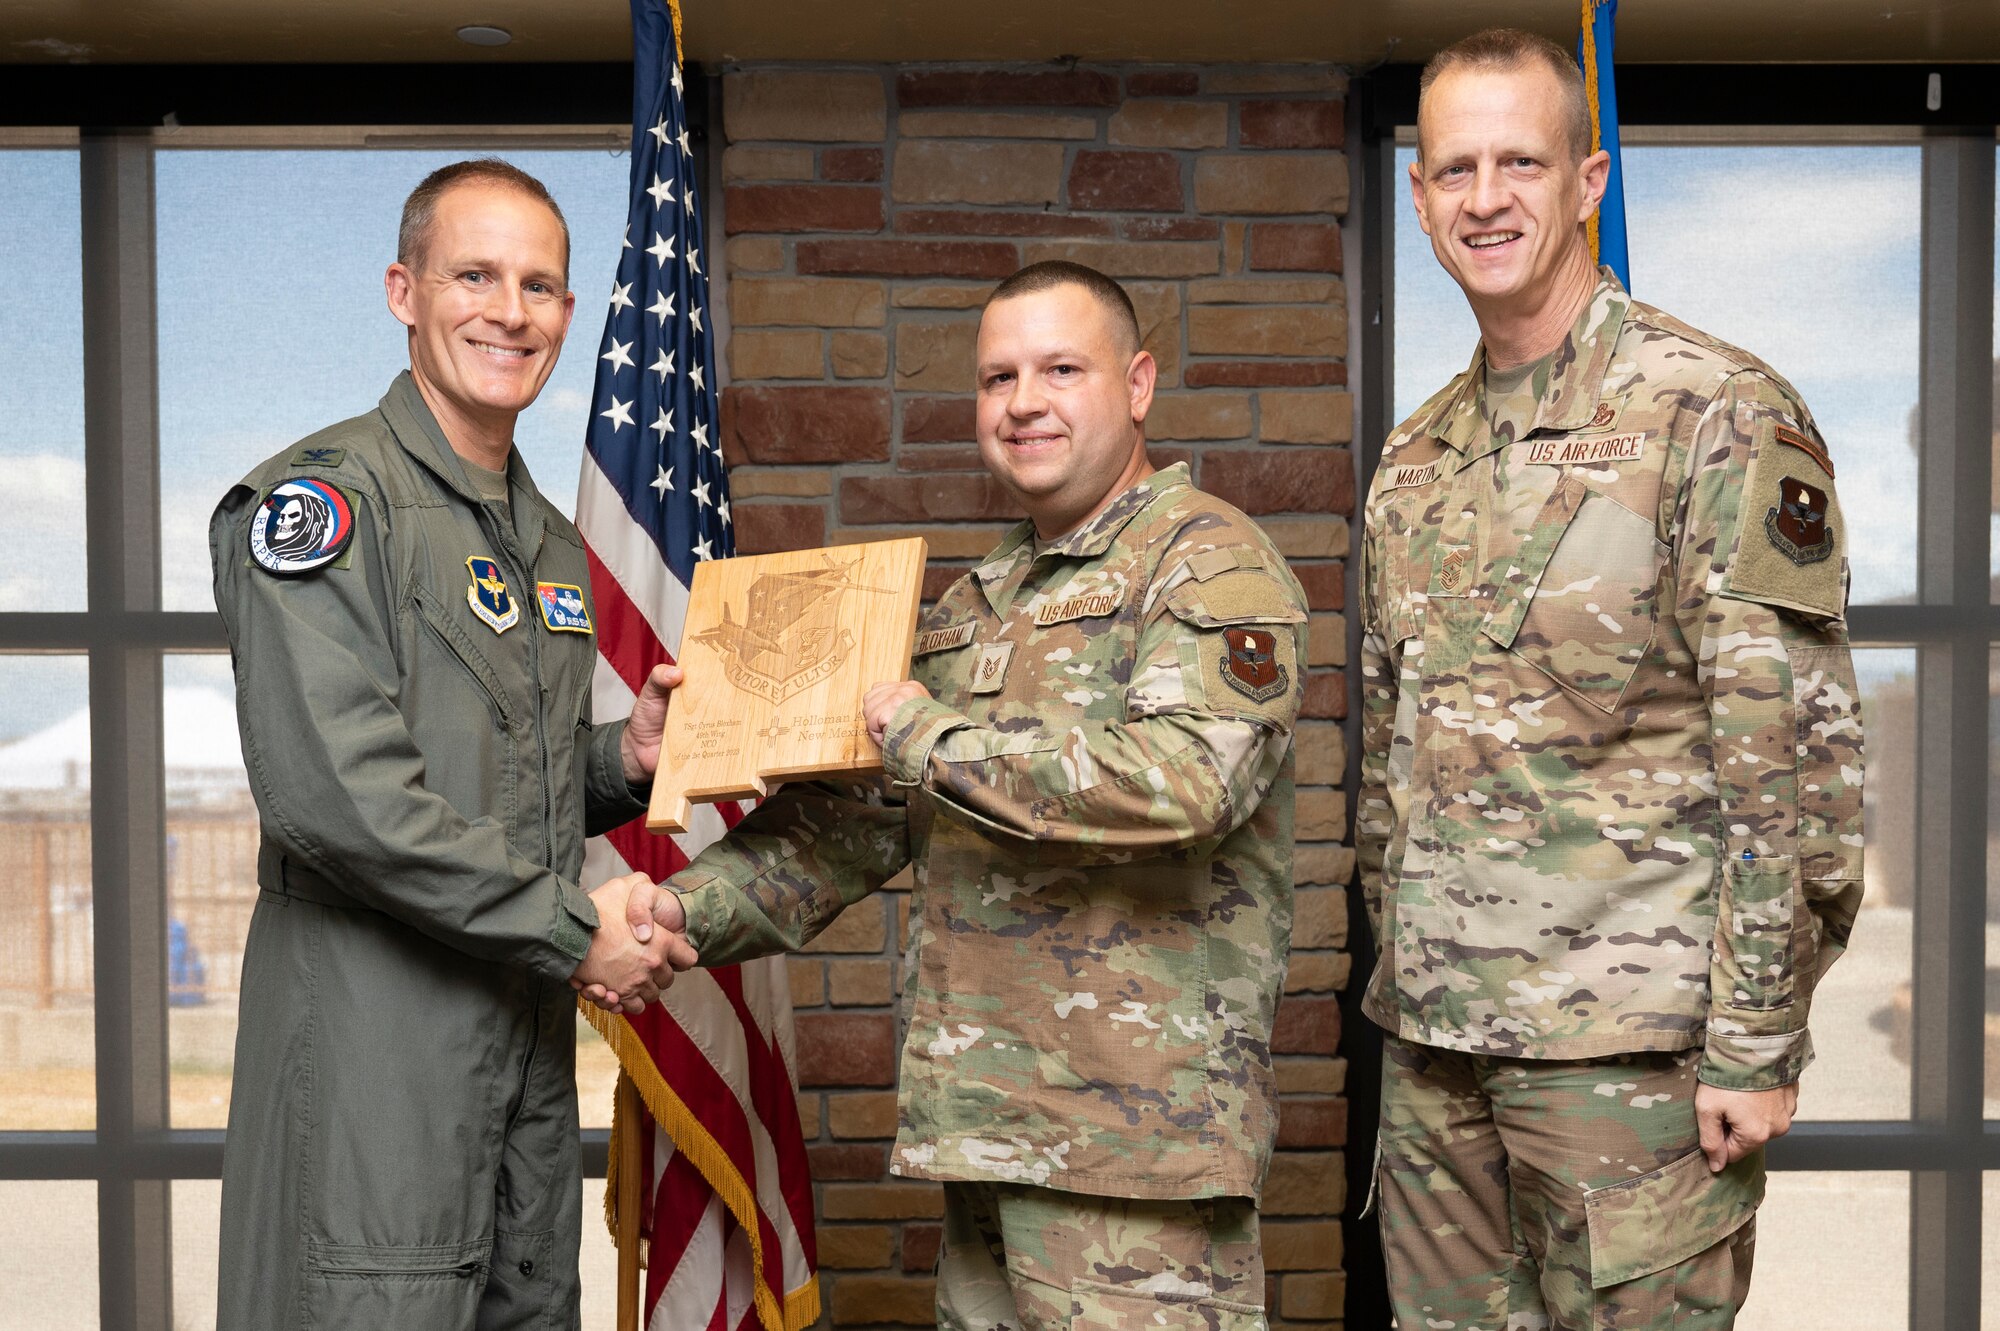 U.S. Air Force Tech. Sgt. Cyrus Bloxham, from the 49th Communications Squadron, accepts the 49th Wing Non Commissioned Officer of the Quarter Award, during the 49th Wing’s 2nd Quarter Award ceremony at Holloman Air Force Base, New Mexico, Aug. 11, 2023. Quarterly award winners were selected based on their technical expertise, demonstration of leadership and job performance. (U.S. Air Force photo by Airman 1st Class Michelle Ferrari)